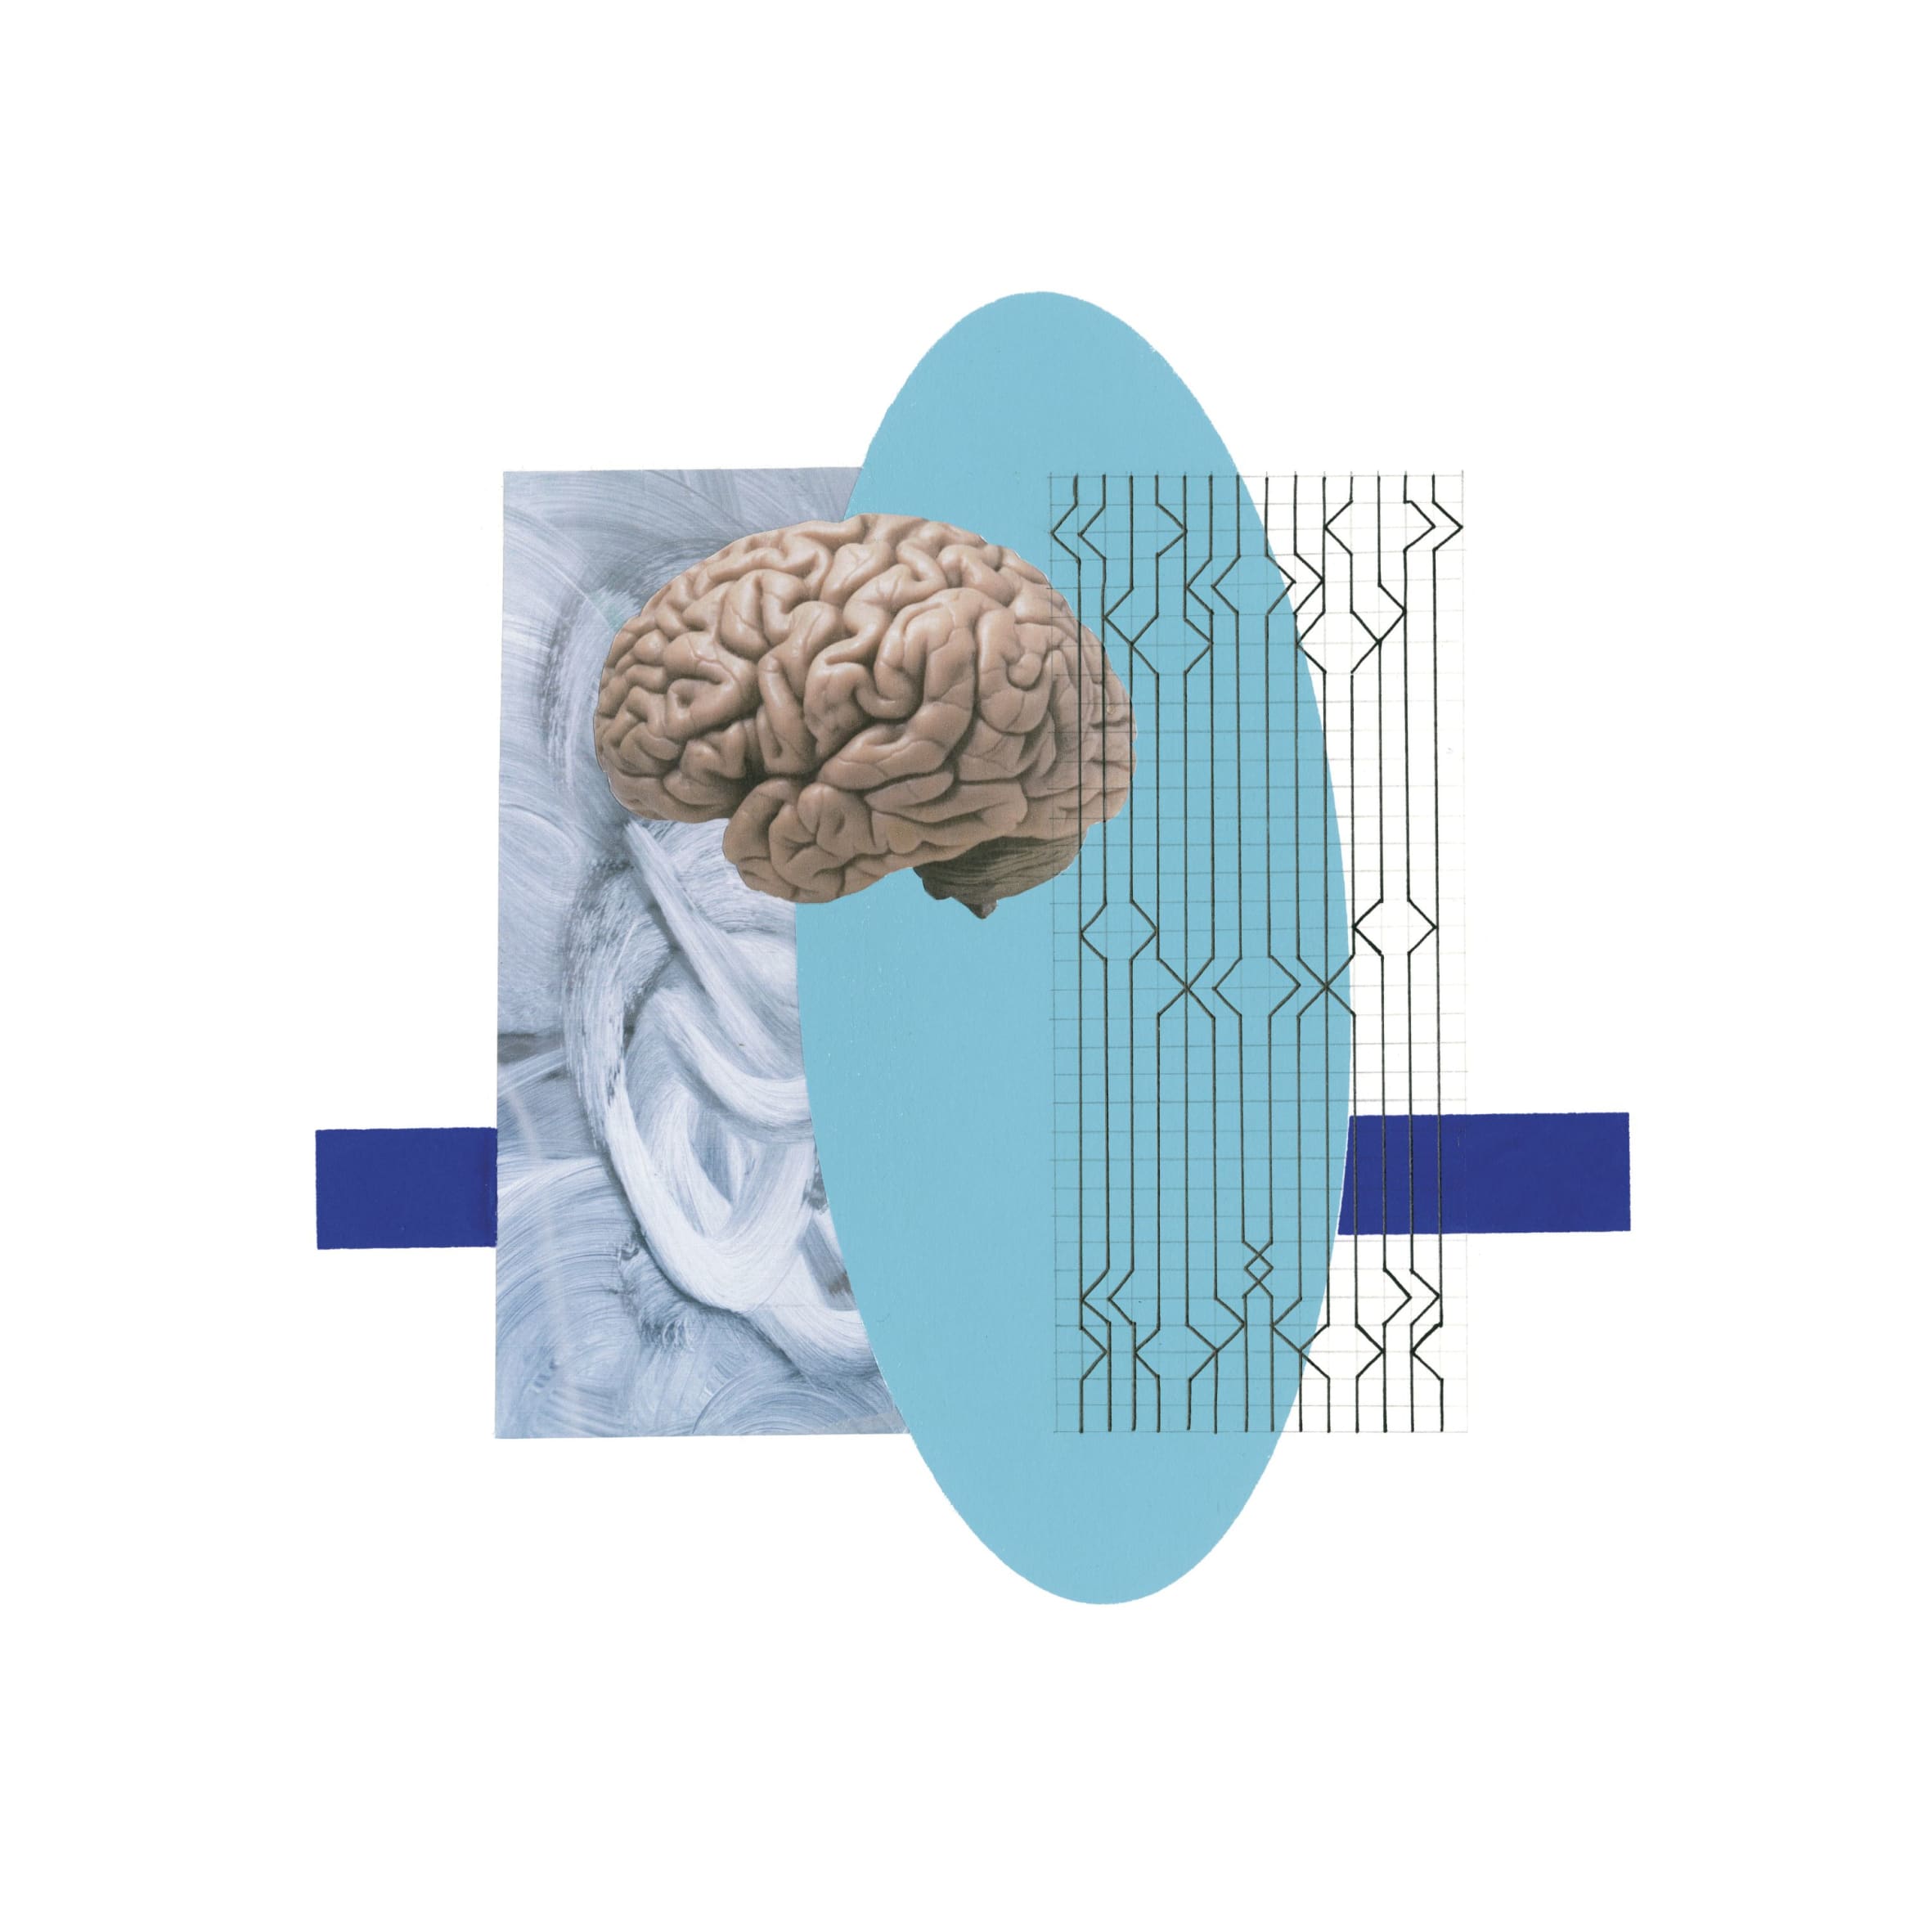 Light blue, dark blue and black 2d shape and black line graphic image with a photograph of a human brain near the middle of the image